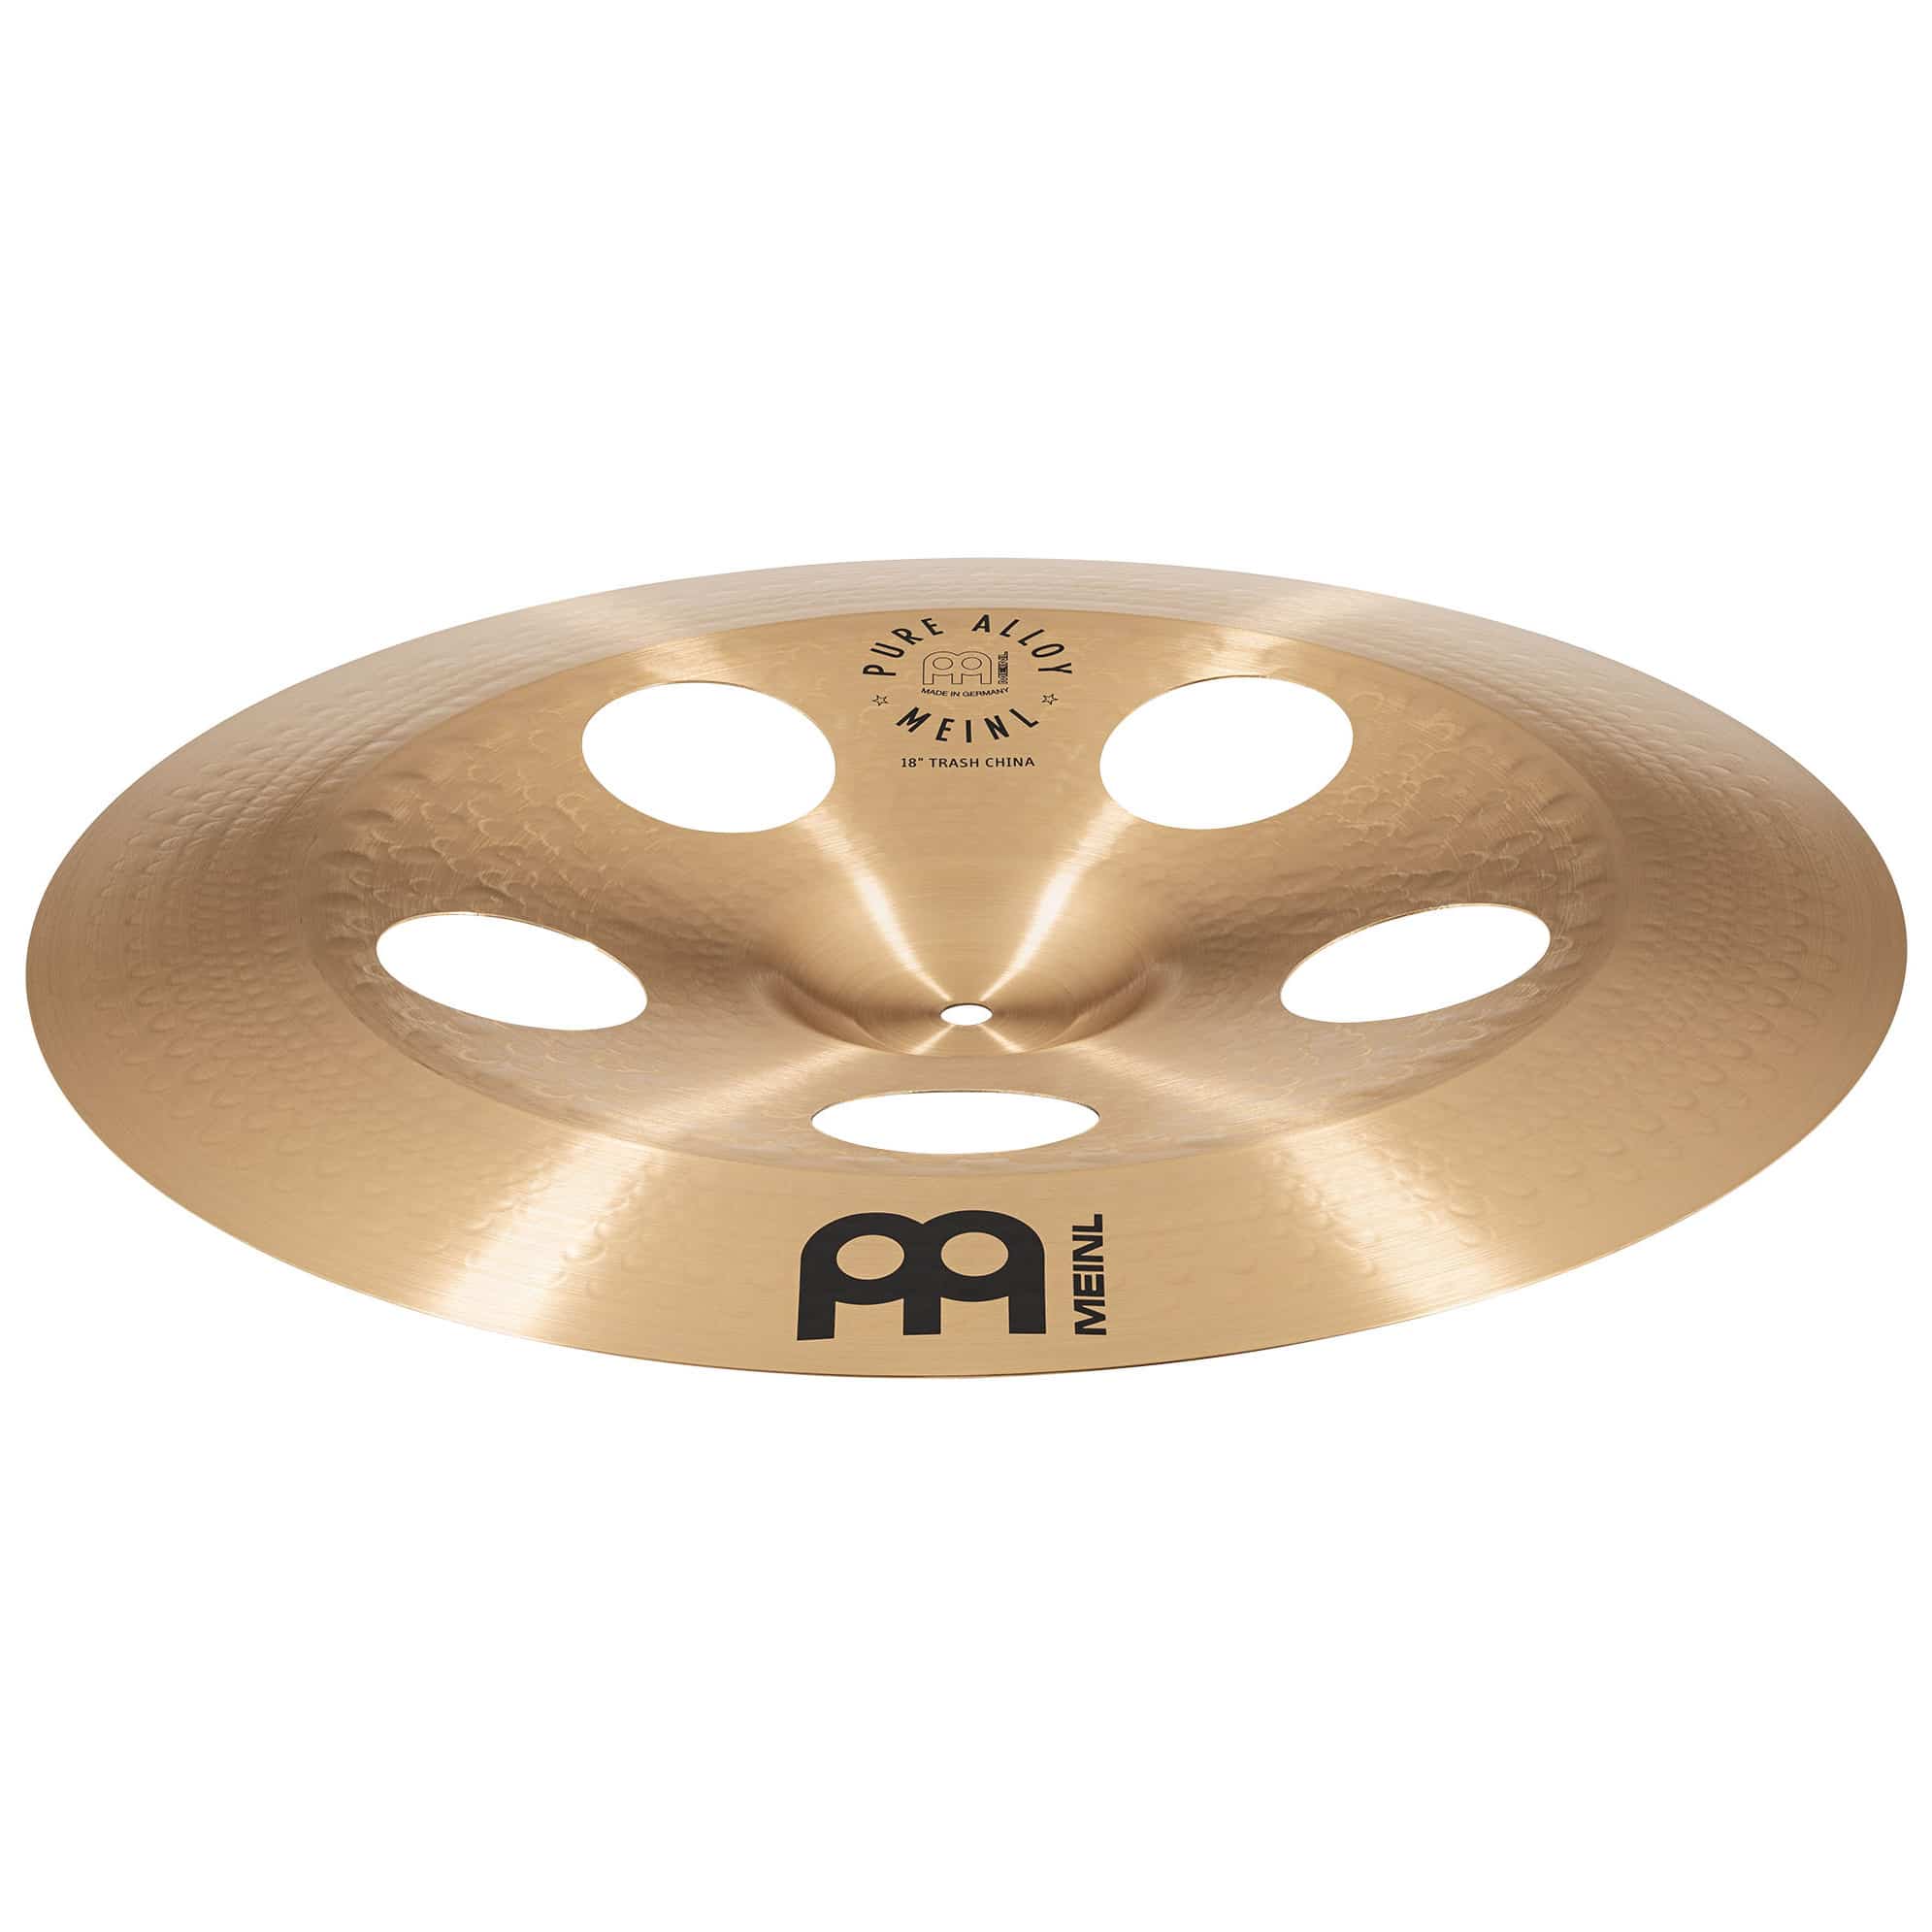 Meinl Cymbals PA18TRCH - 18" Pure Alloy Trash China 6